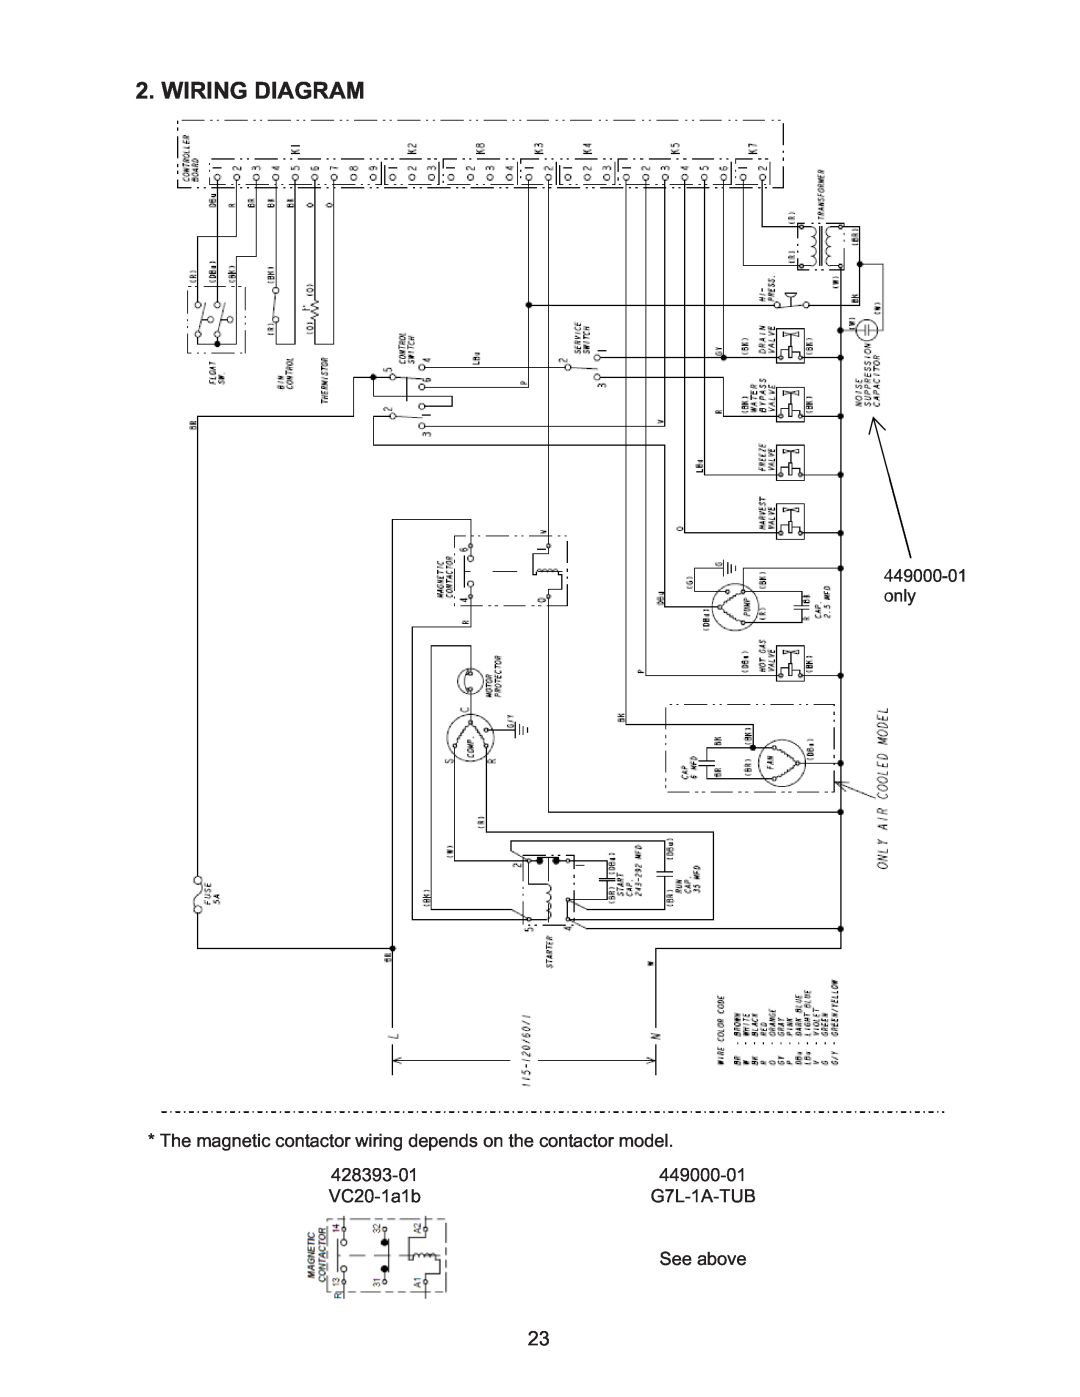 Hoshizaki KMD-410MWH, KMD-410MAH manual Wiring Diagram, The magnetic contactor wiring depends on the contactor model 